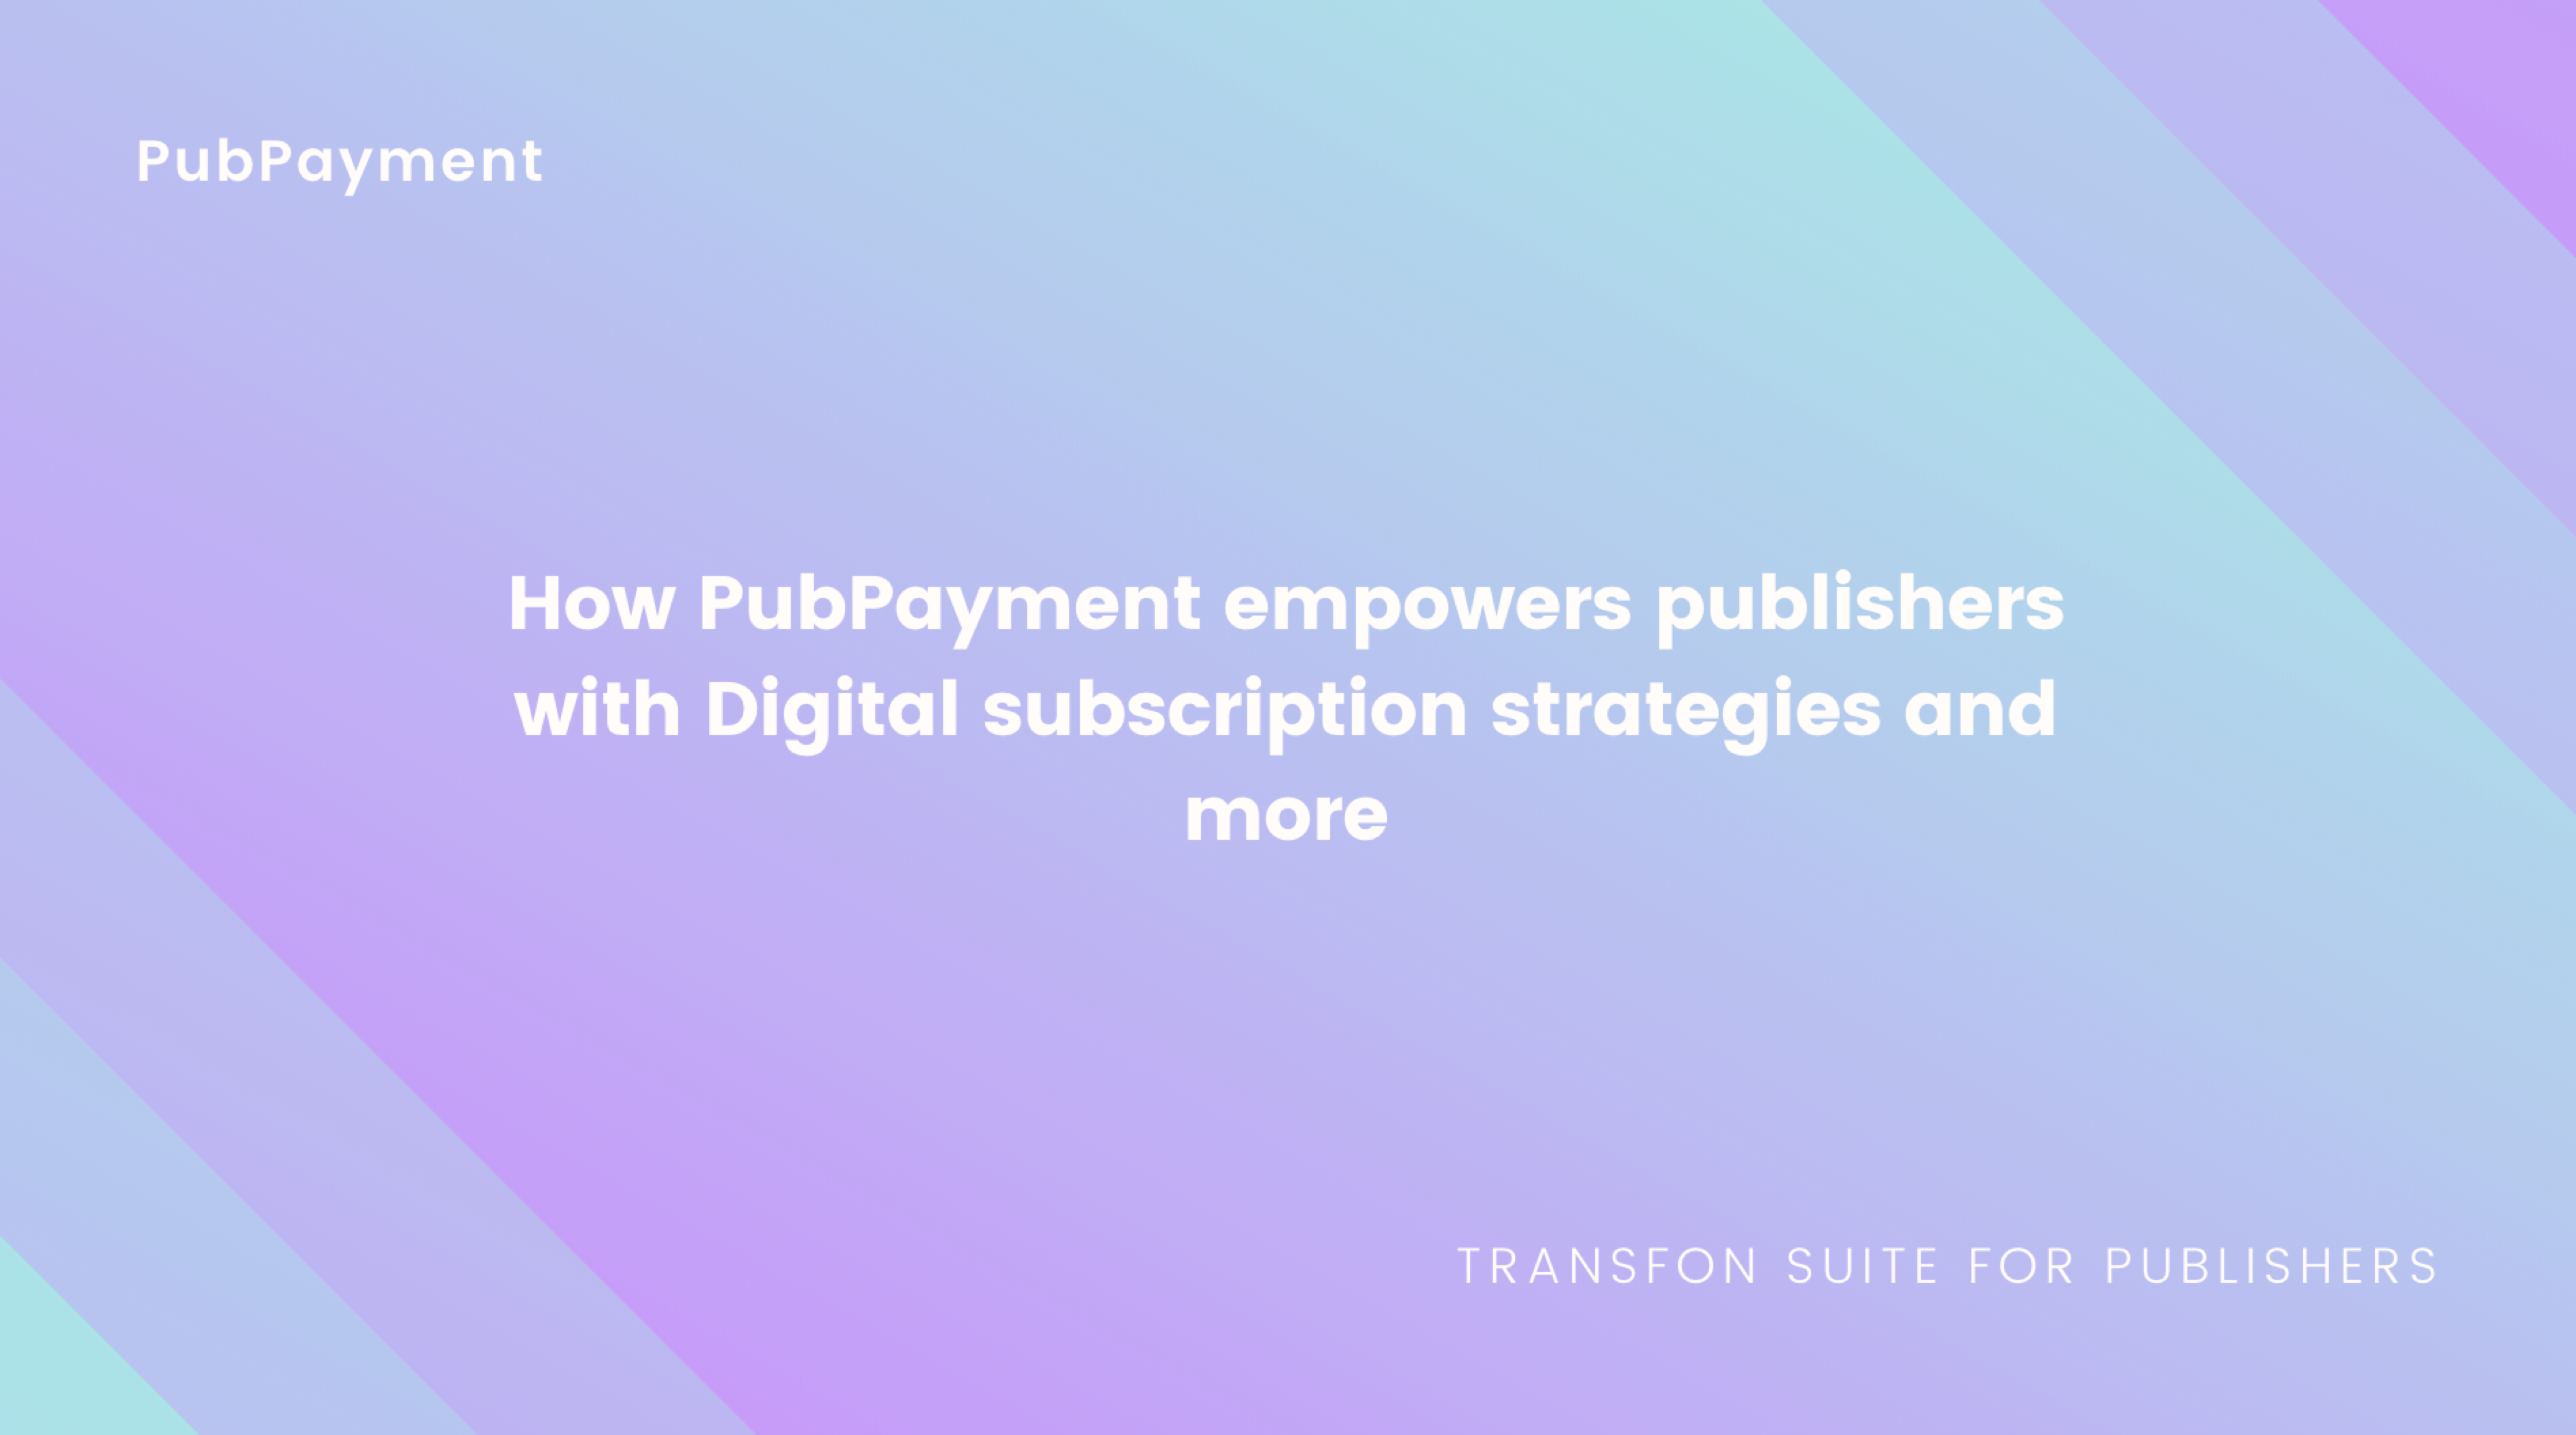 Empower publishers with Digital subscription strategies and more